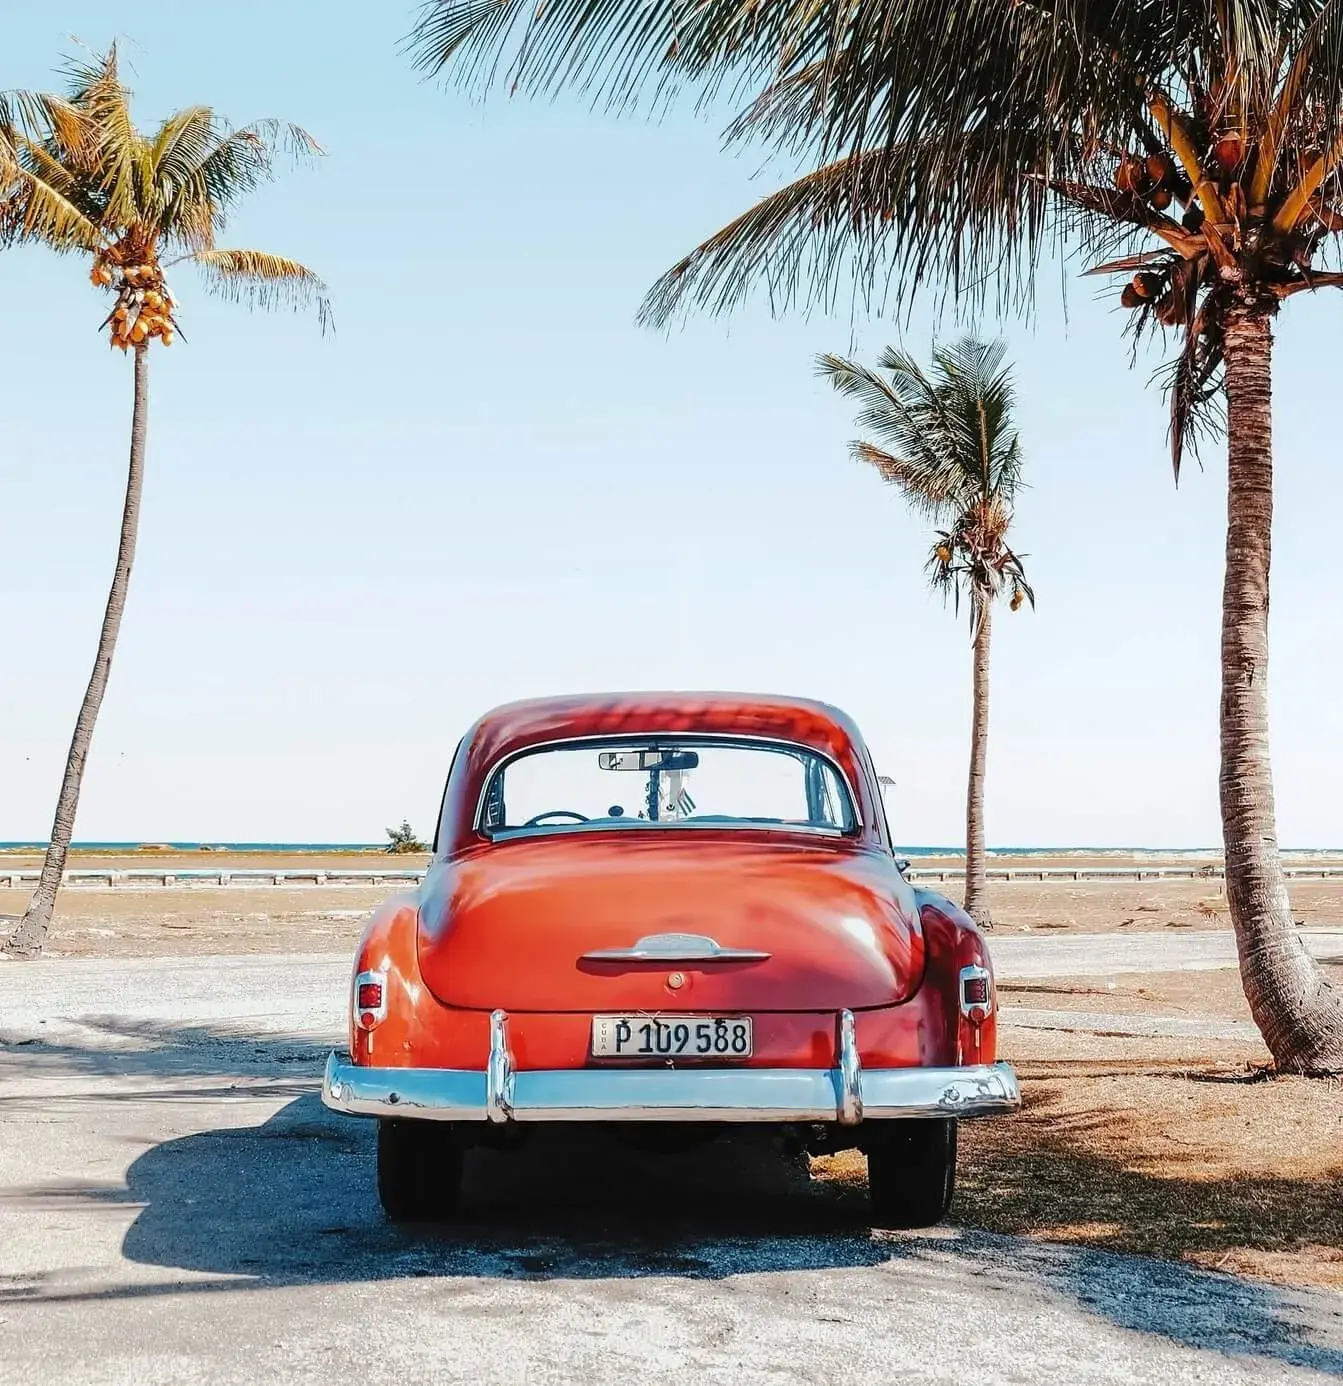 How to Ship a Classic Car to Hawaii (With Peace of Mind)